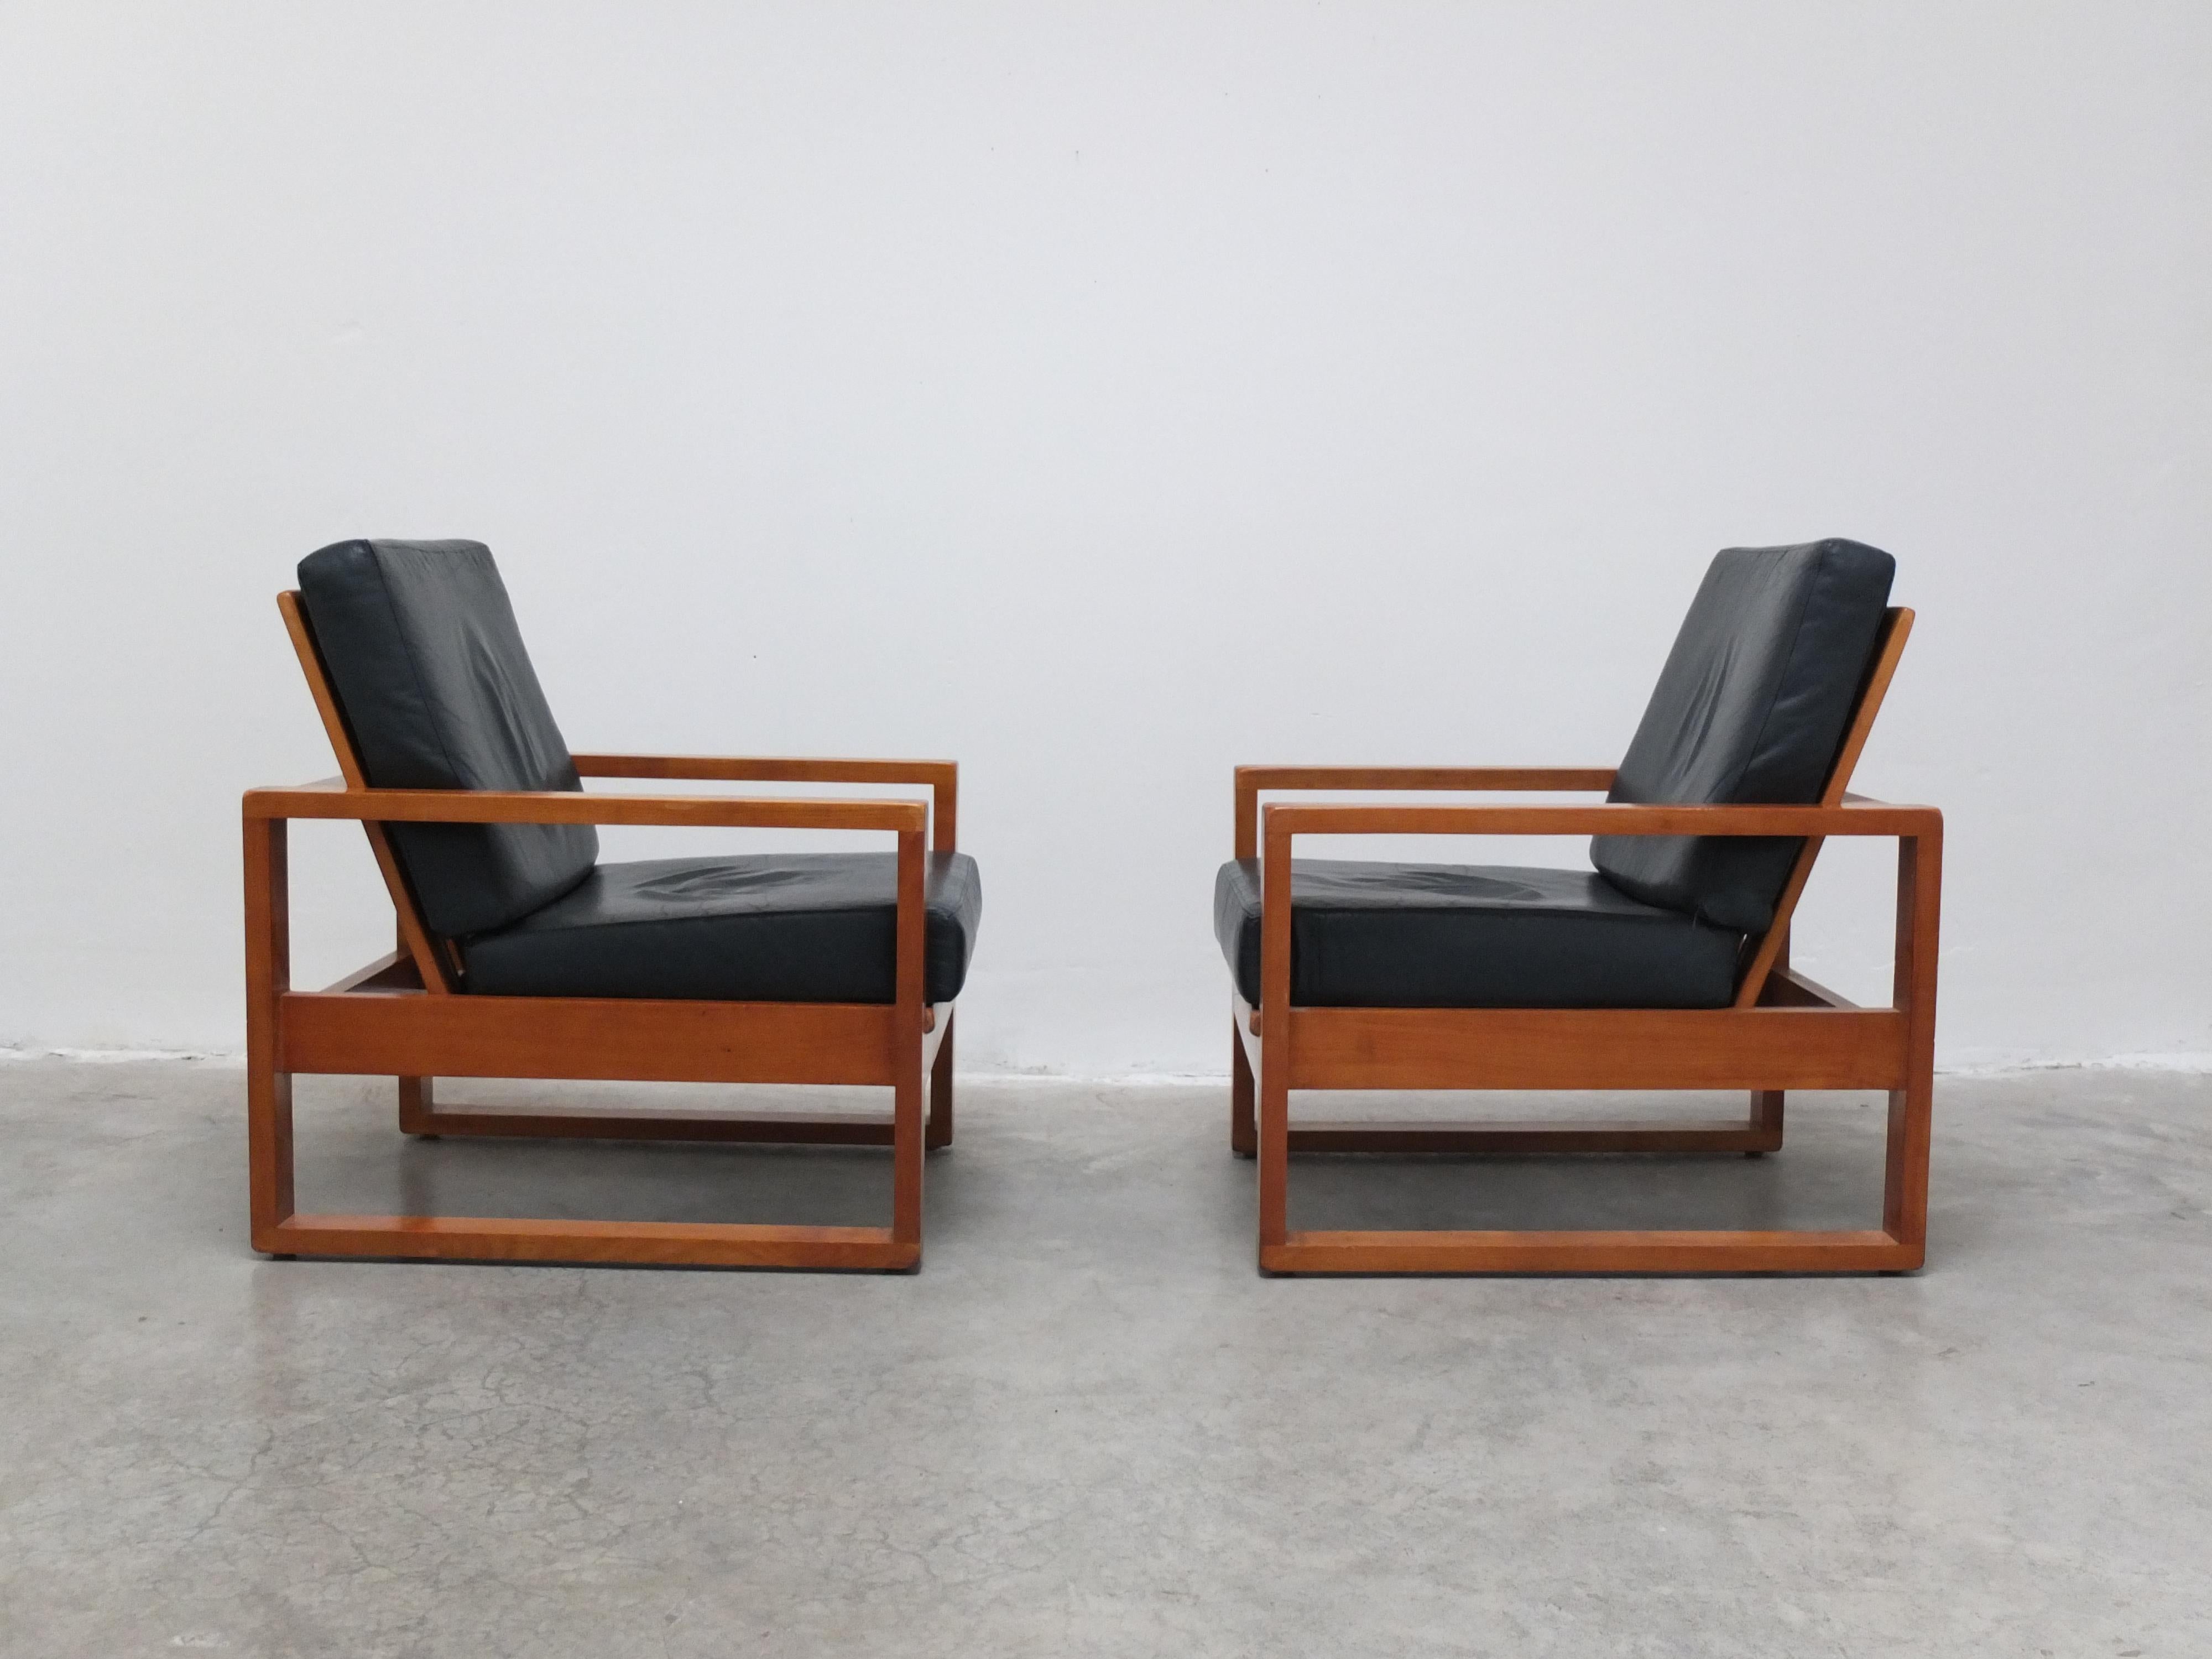 20th Century Unique Pair of Modernist Lounge Chairs by Van Den Berghe-Pauvers, 1960s For Sale